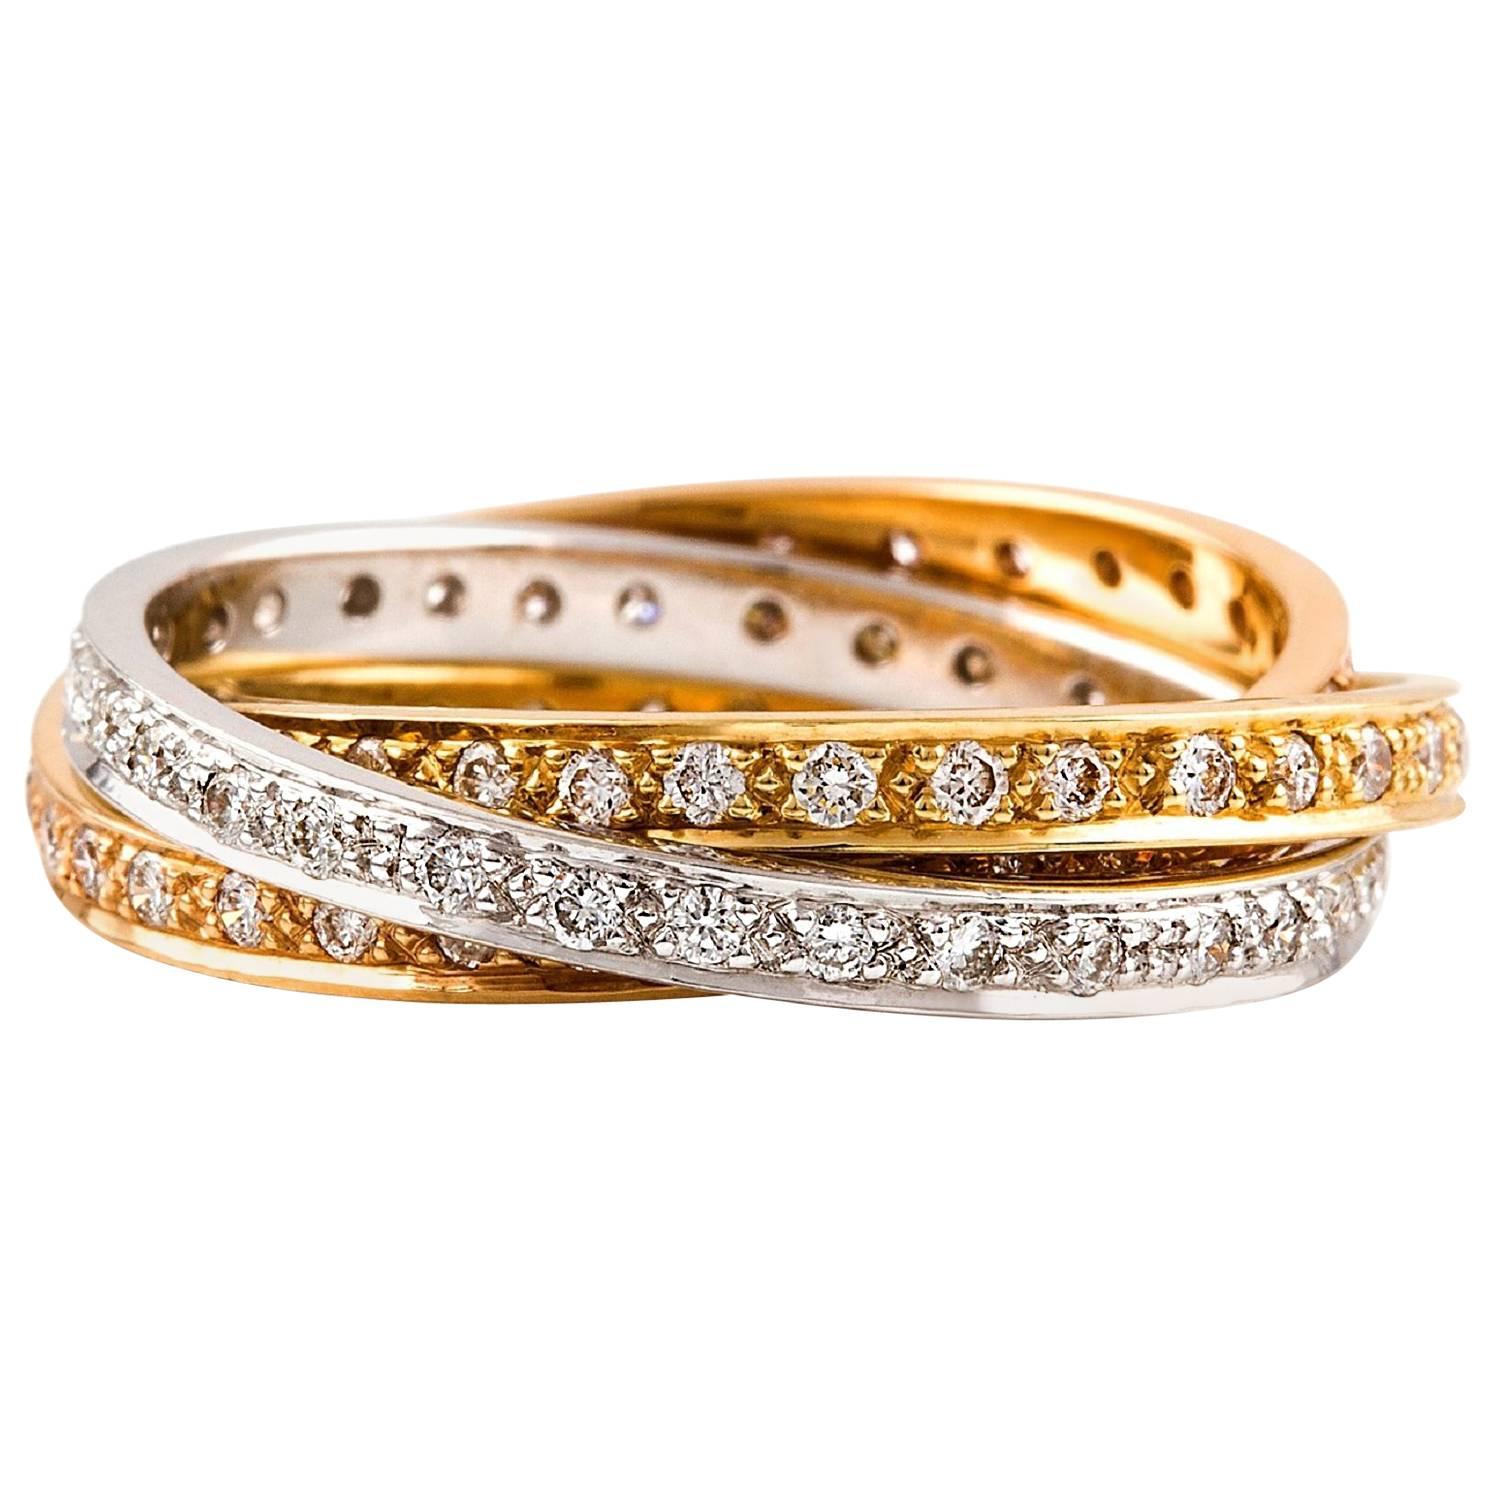 Russo  Diamante Ring

The multi-gold - a mix of 18 carat white, yellow and rose golds, makes this Russian wedding ring a standout. Consisting of three interlocking bands, also known as a trinity ring, enhances the sparkle of the diamond with